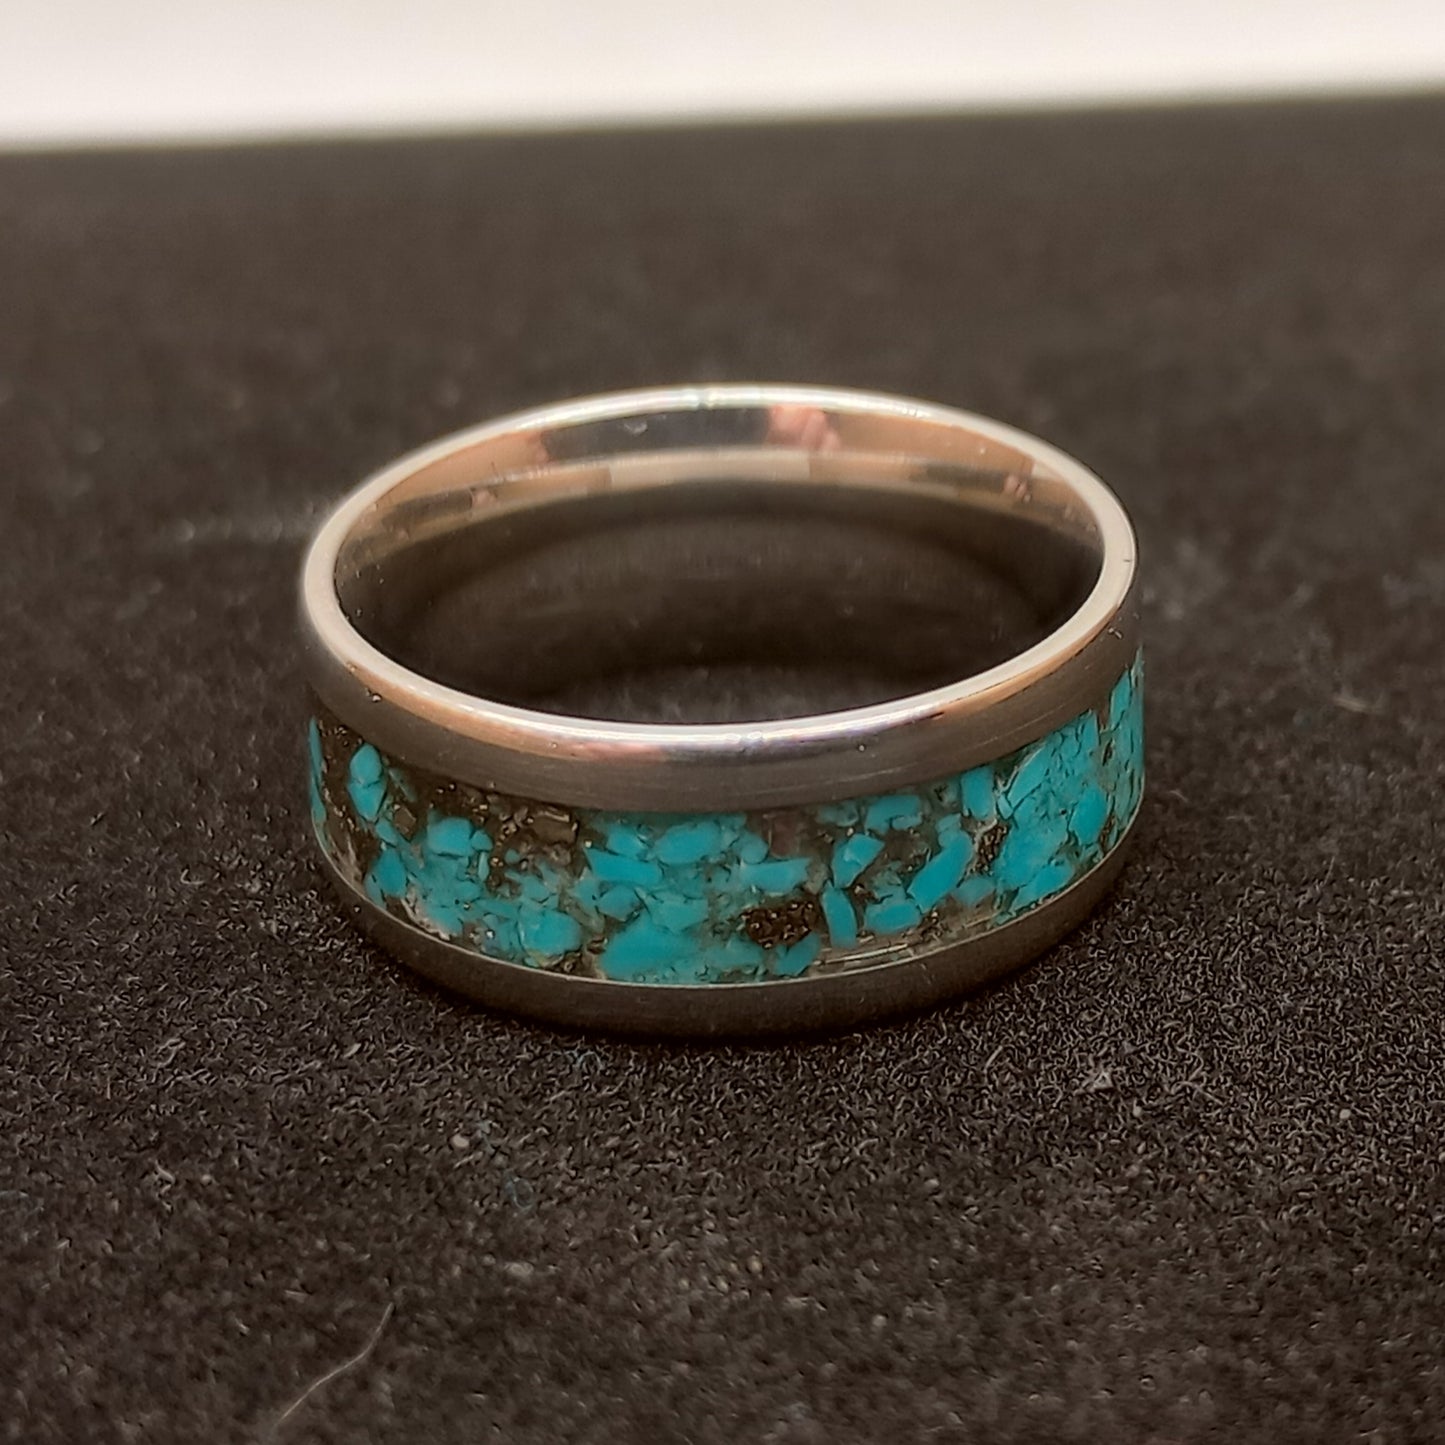 Turquoise and Pyrite Stainless Steel Ring Size 7